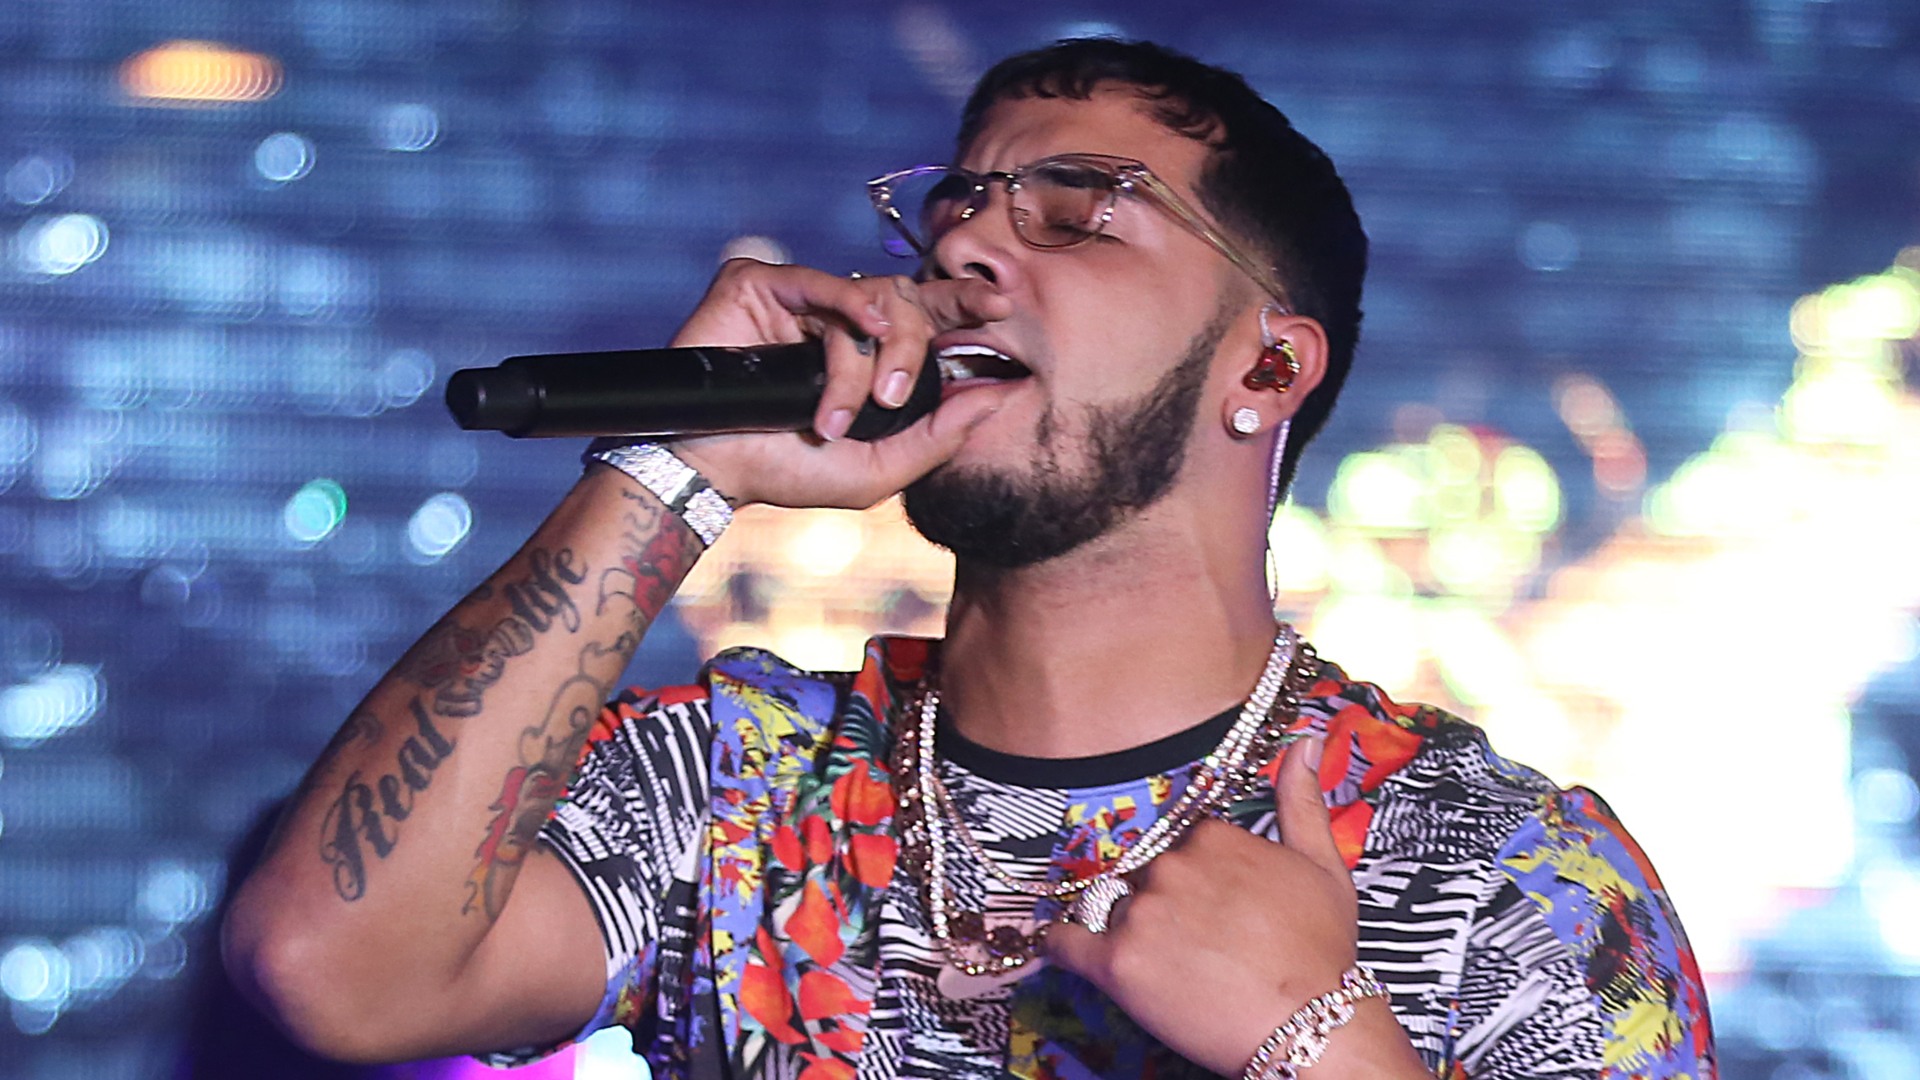 DALLAS, TX - NOVEMBER 09: Anuel AA performs live during a concert as part of the 'Real Hasta la Muerte' tour at Far West on November 9, 2018 in Dallas, Texas. (Photo by Omar Vega/Getty Images)